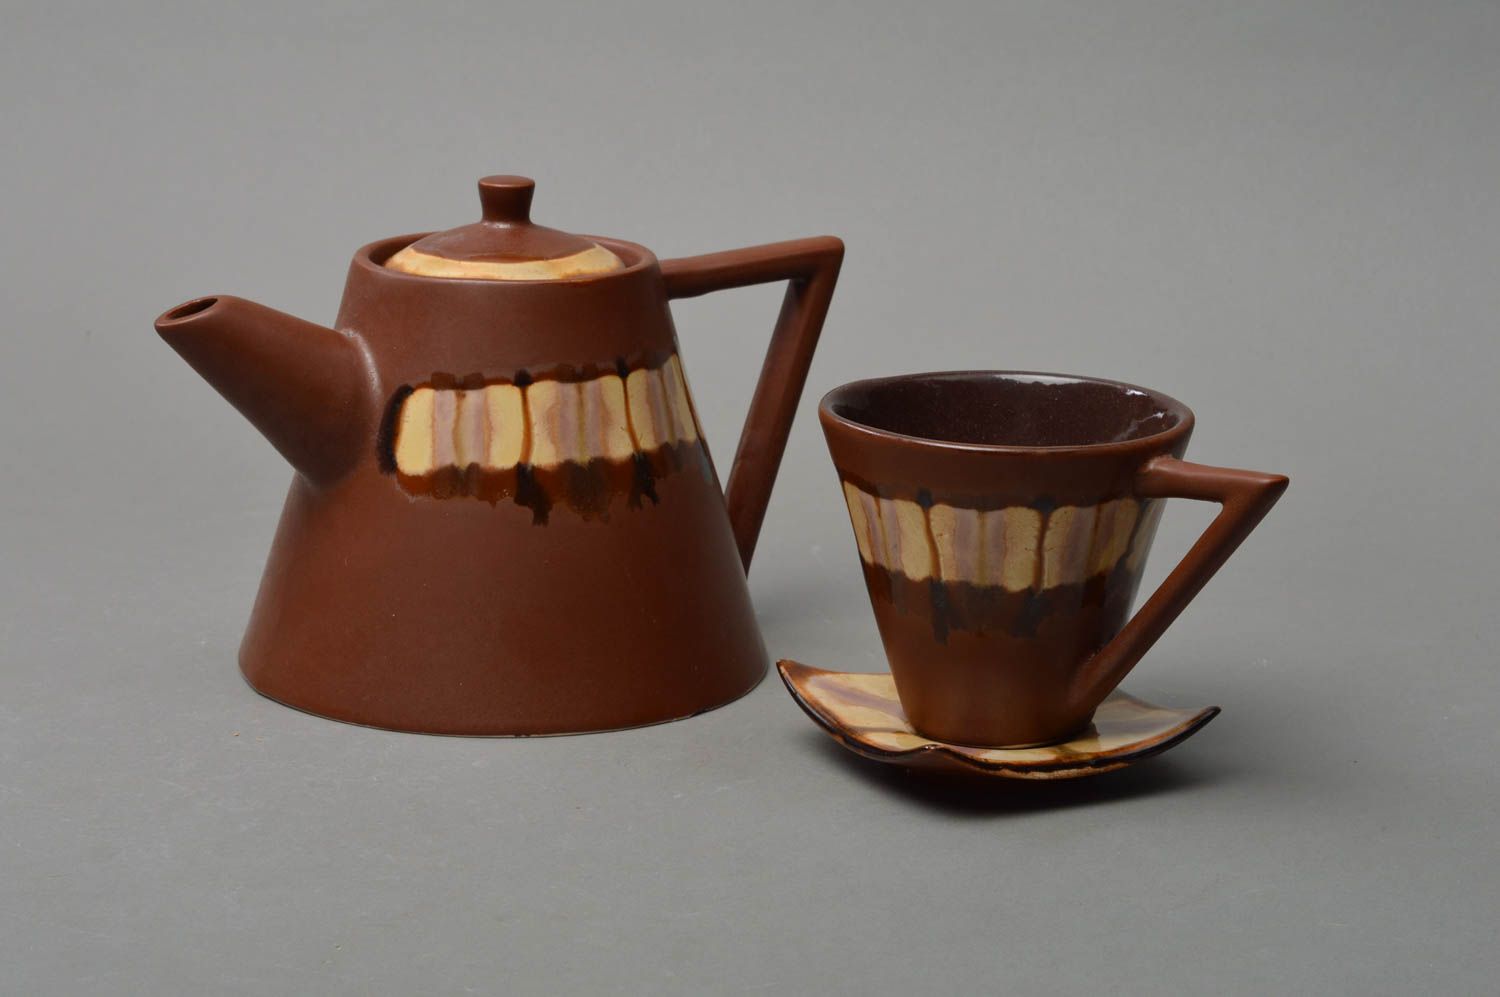 Art handmade pottery set of pyramid shape kettle and teacup in brown and beige color photo 1